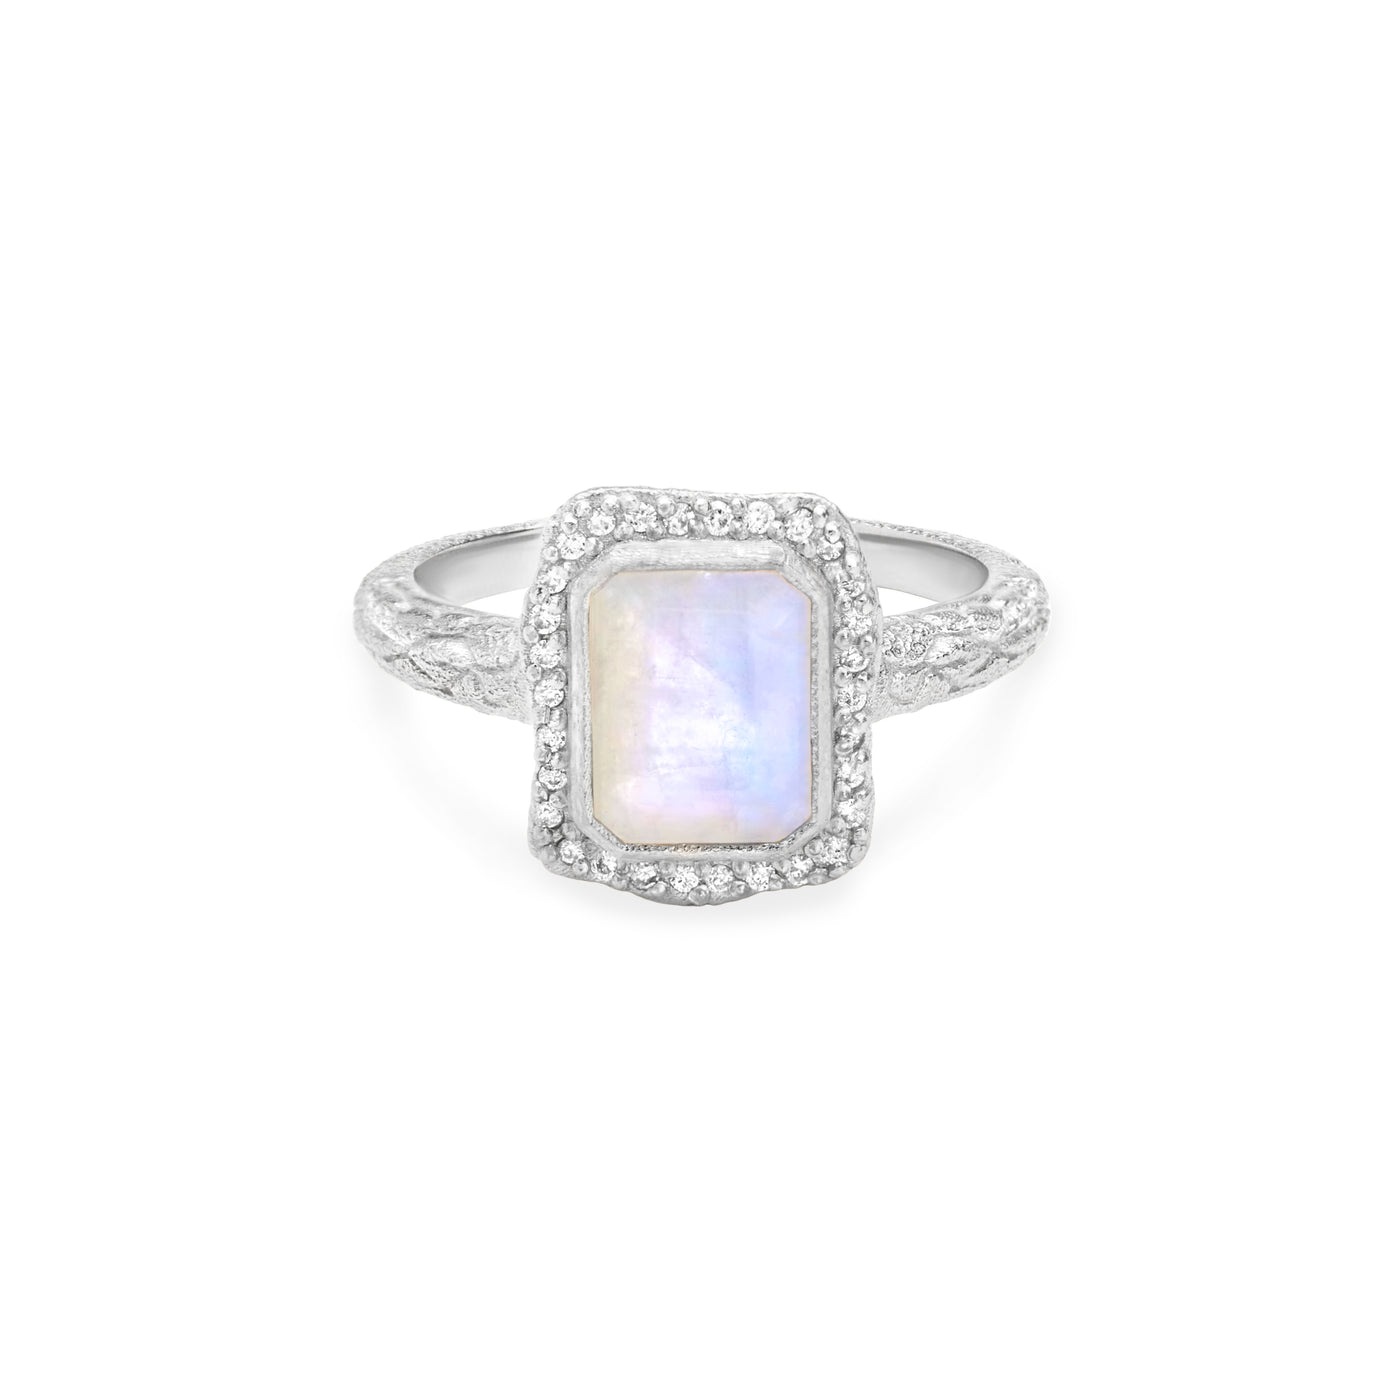 14 Karat White Gold Ring with Rectangle Shaped Moonstone with Halo of White Diamonds Against White Background